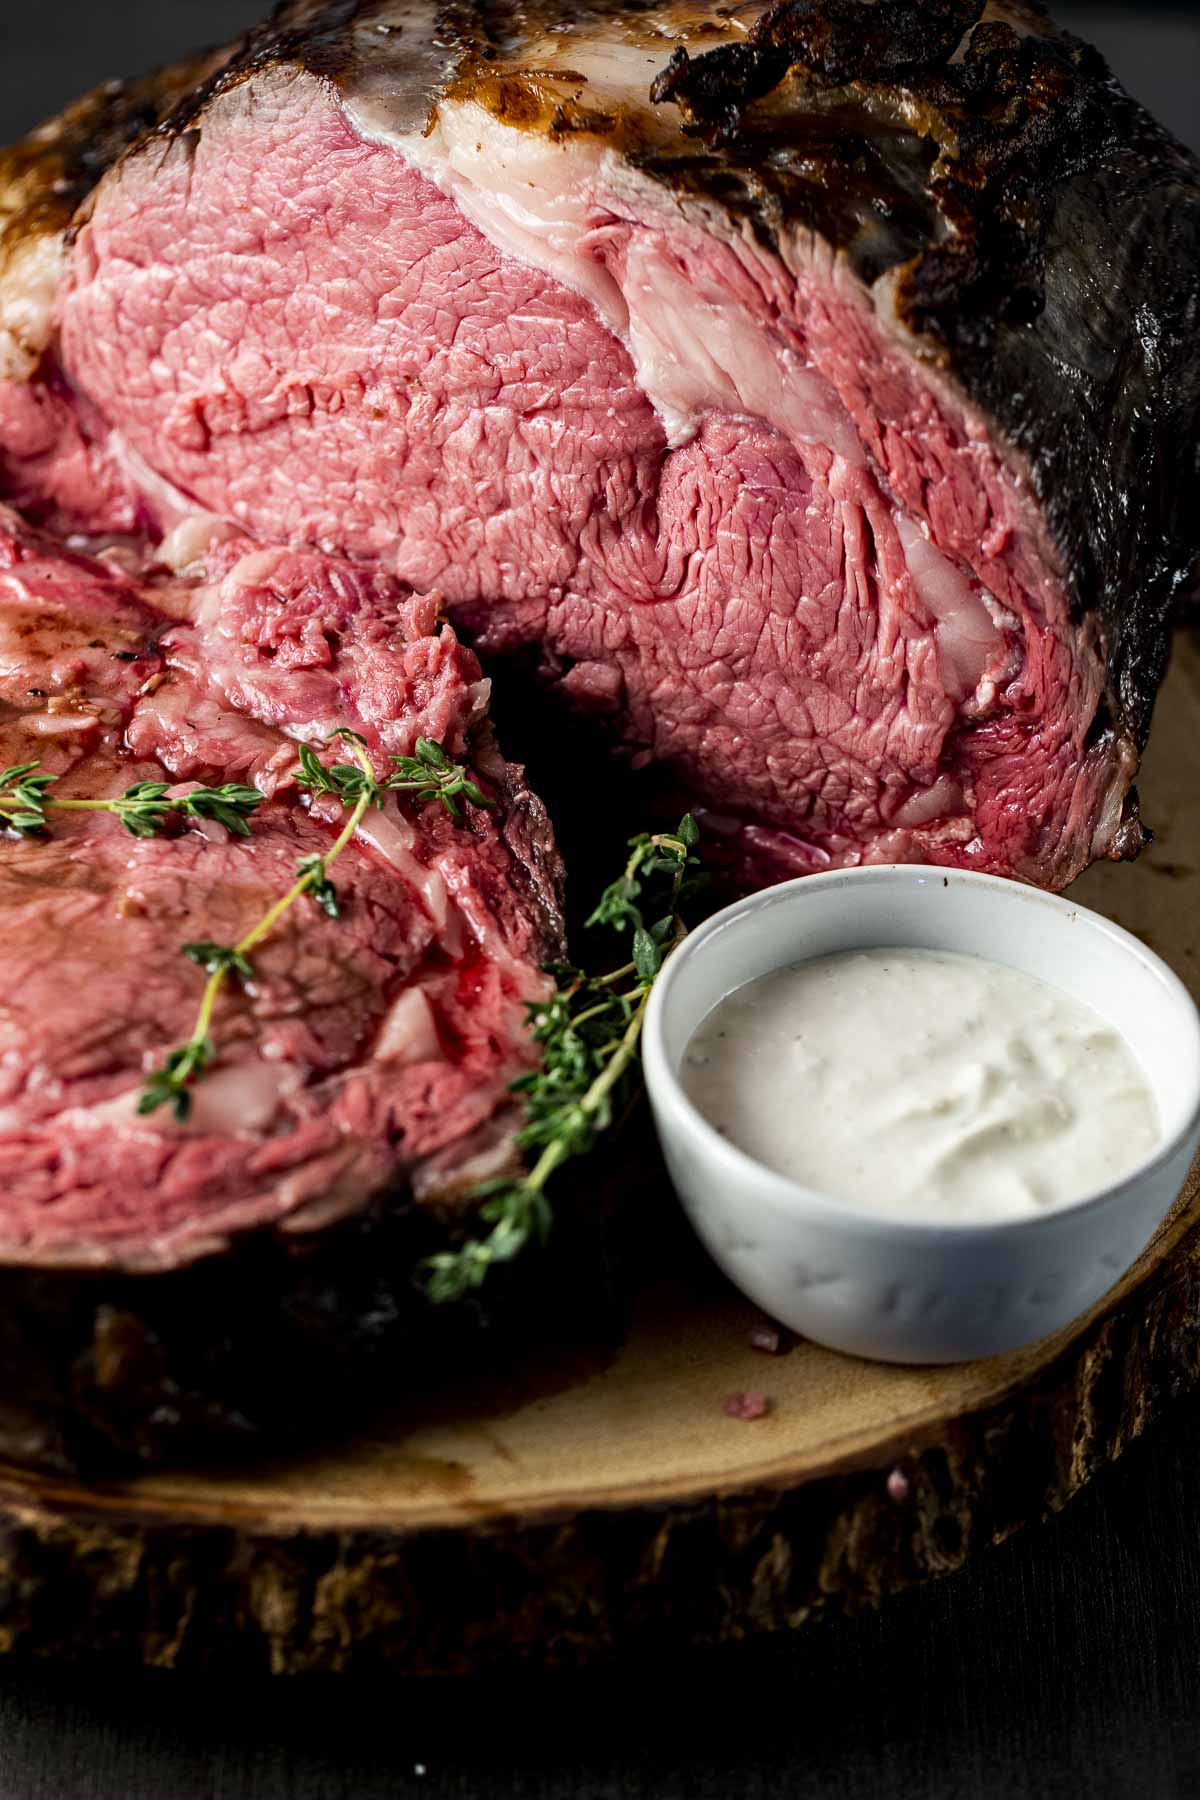 Rib roast on a wooden board with a small bowl of horseradish sauce on the side.